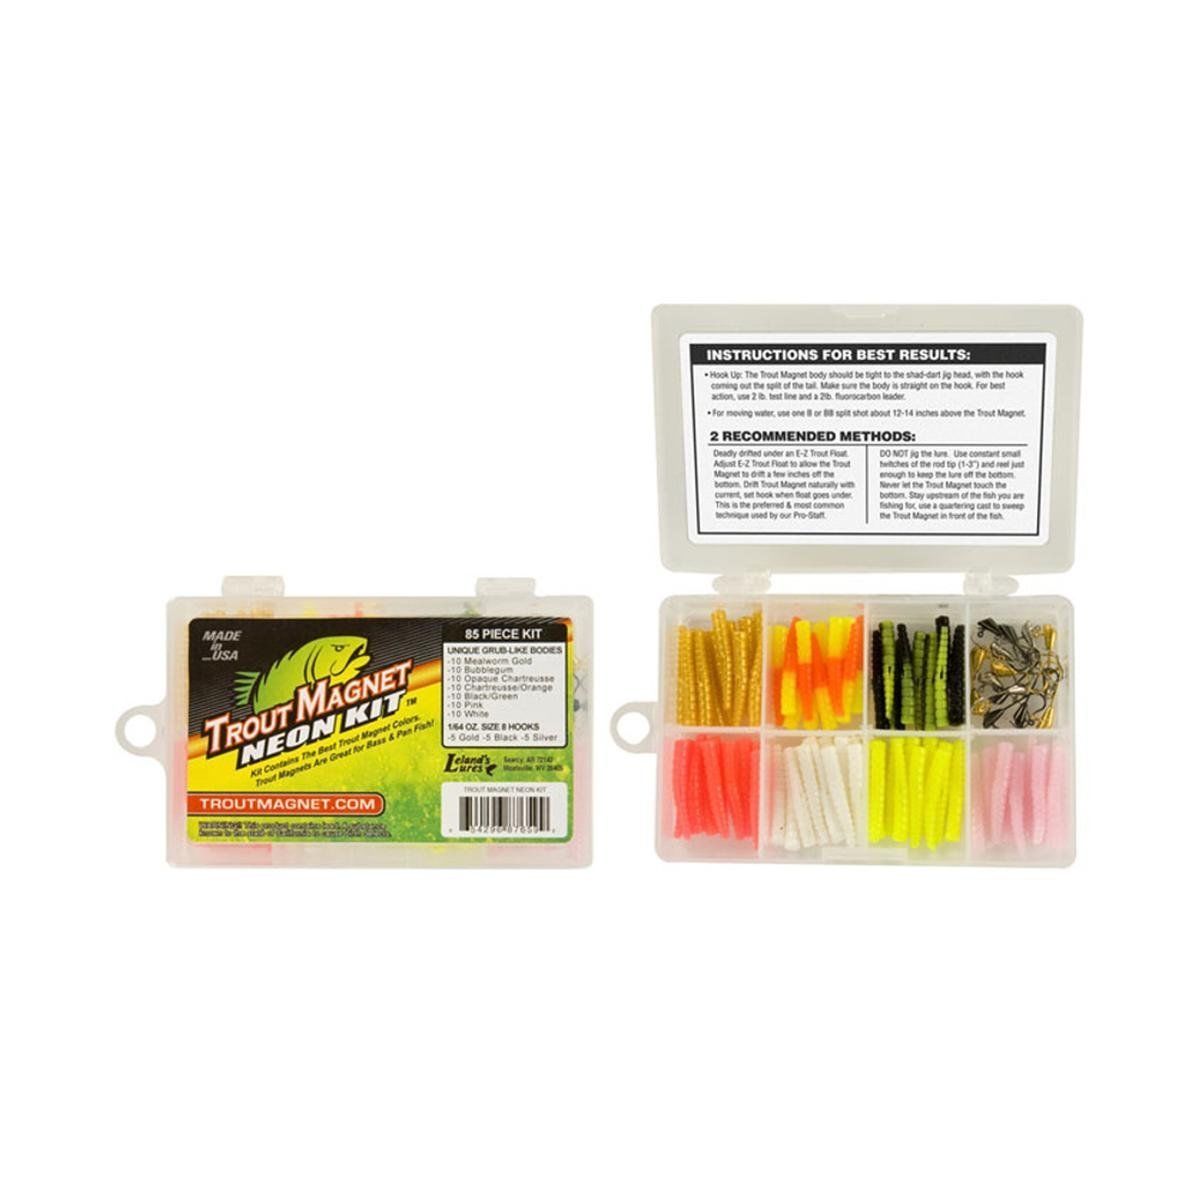 Leland Trout Magnet Kit & Grubs Shad Darts NEON KIT -85 Piece Made in USA